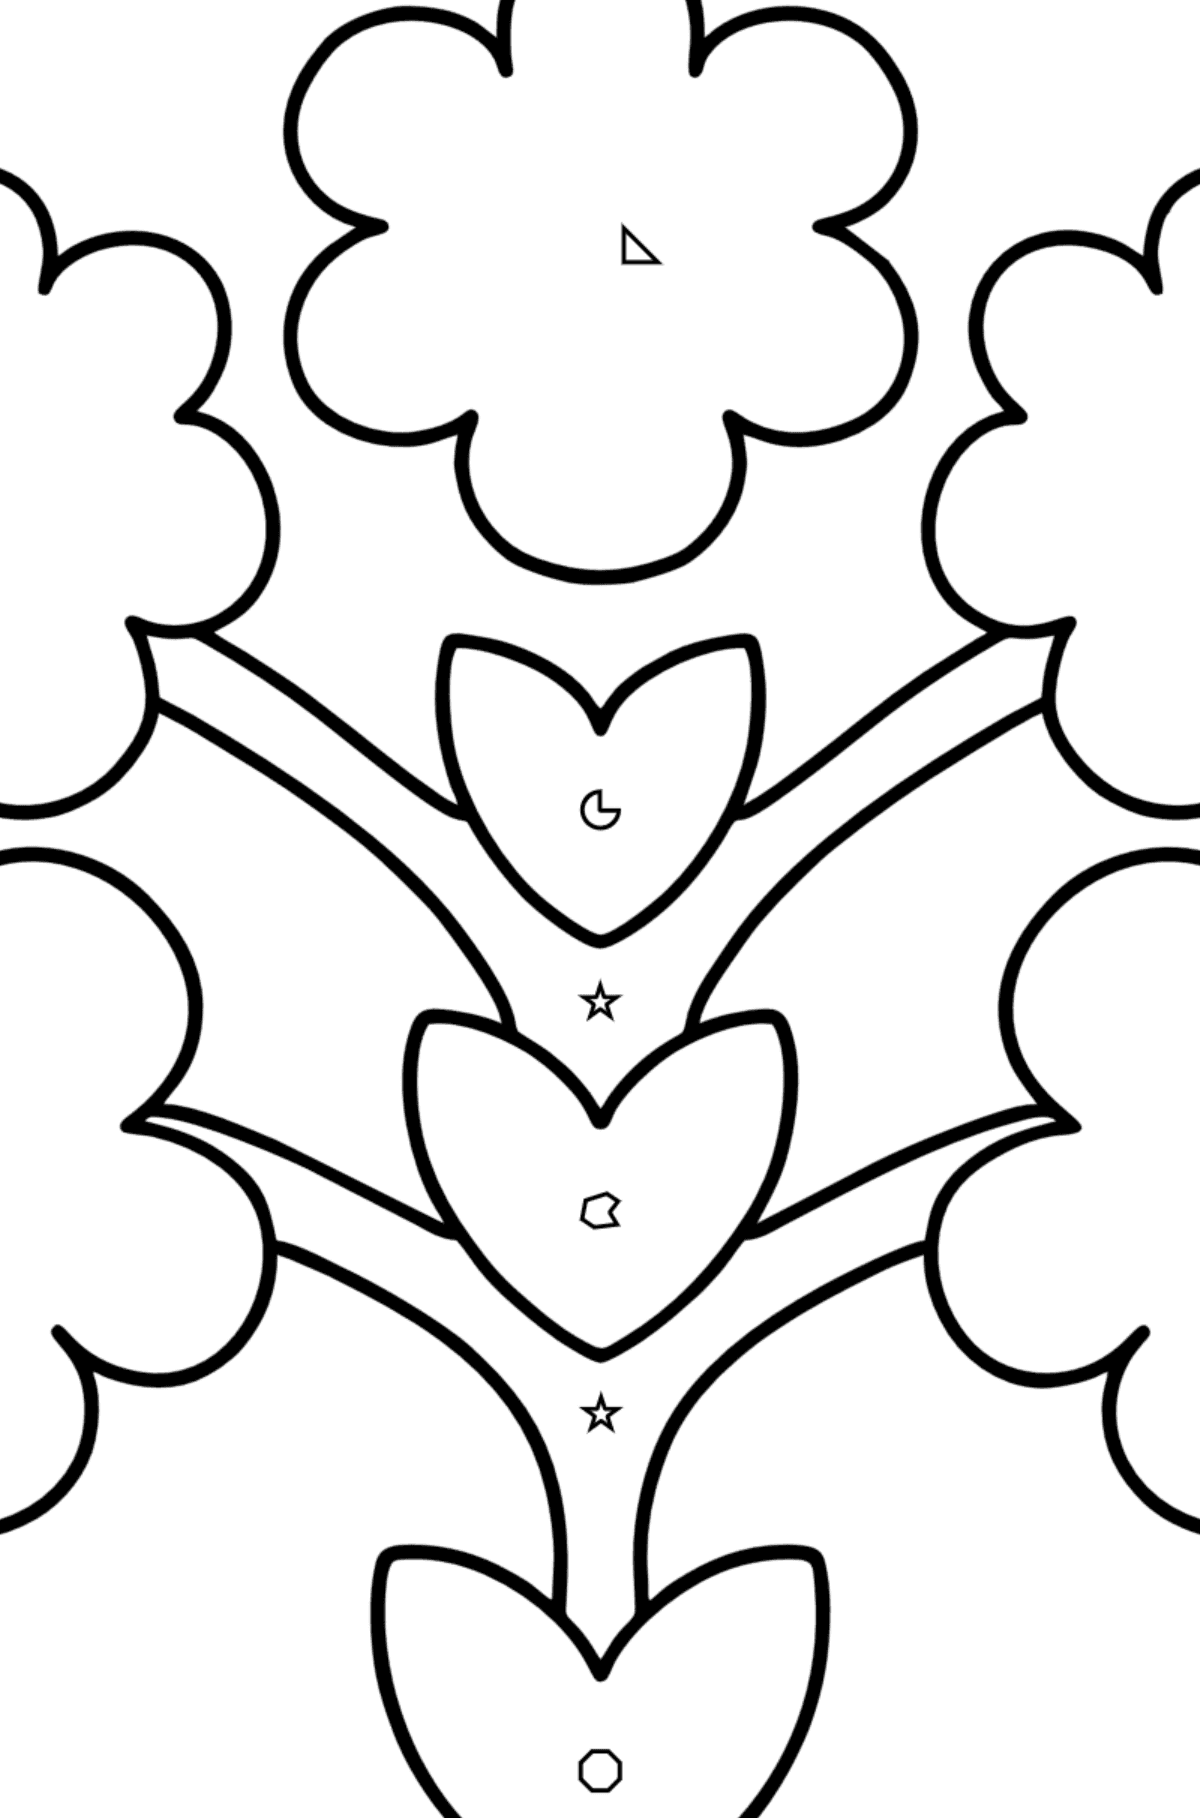 Zentangle Art flower coloring pages for kids - Coloring by Geometric Shapes for Kids